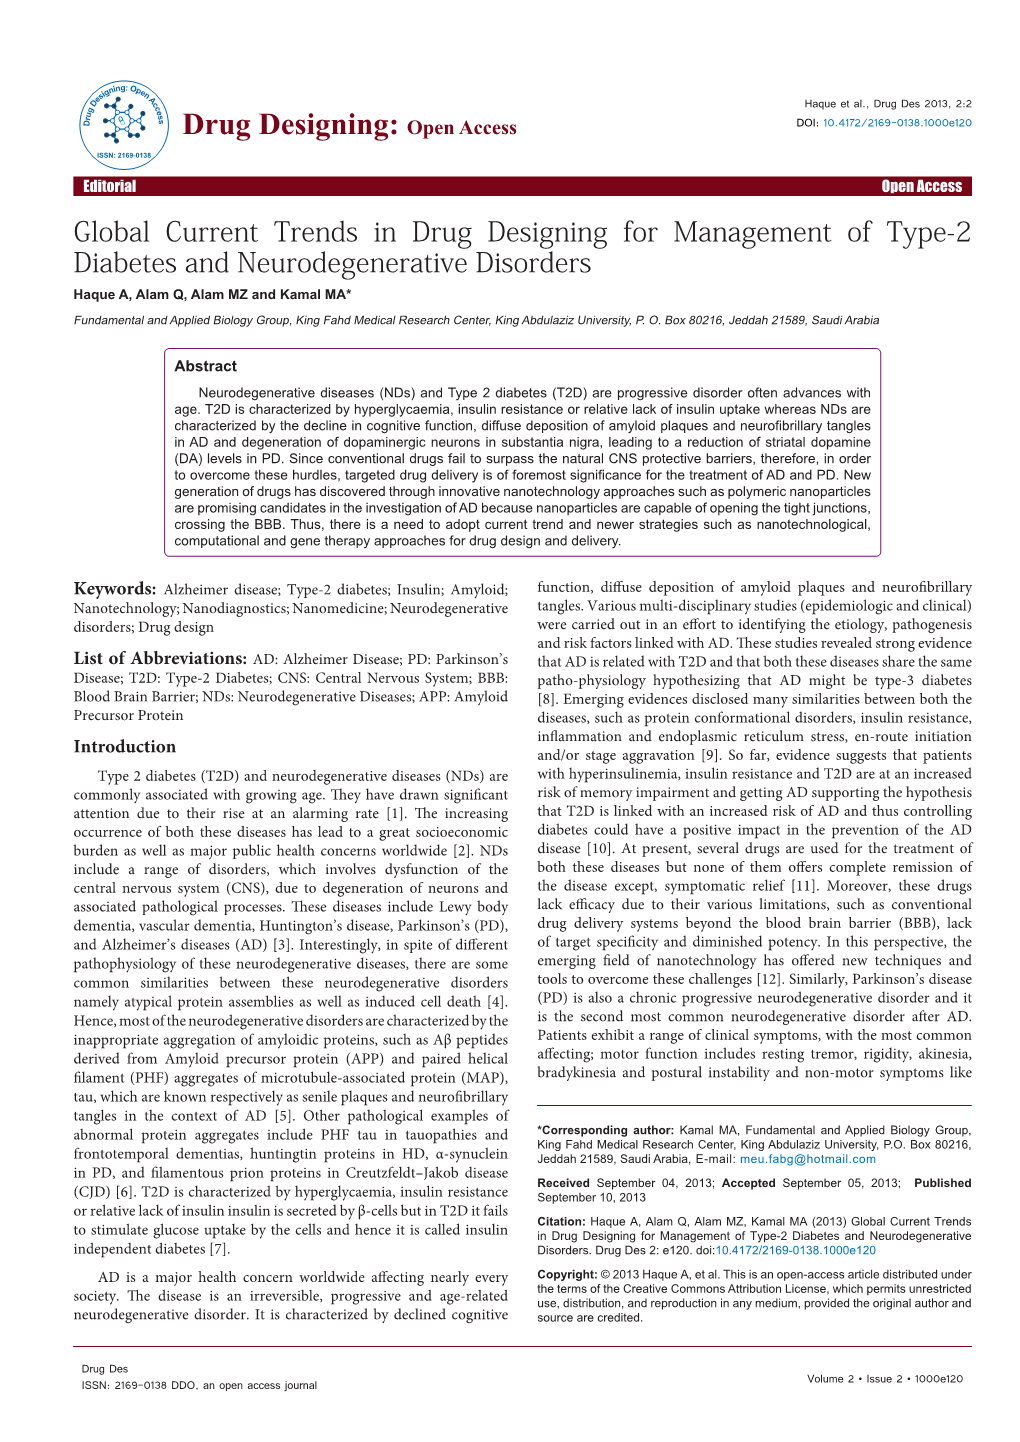 Global Current Trends in Drug Designing for Management of Type-2 Diabetes and Neurodegenerative Disorders